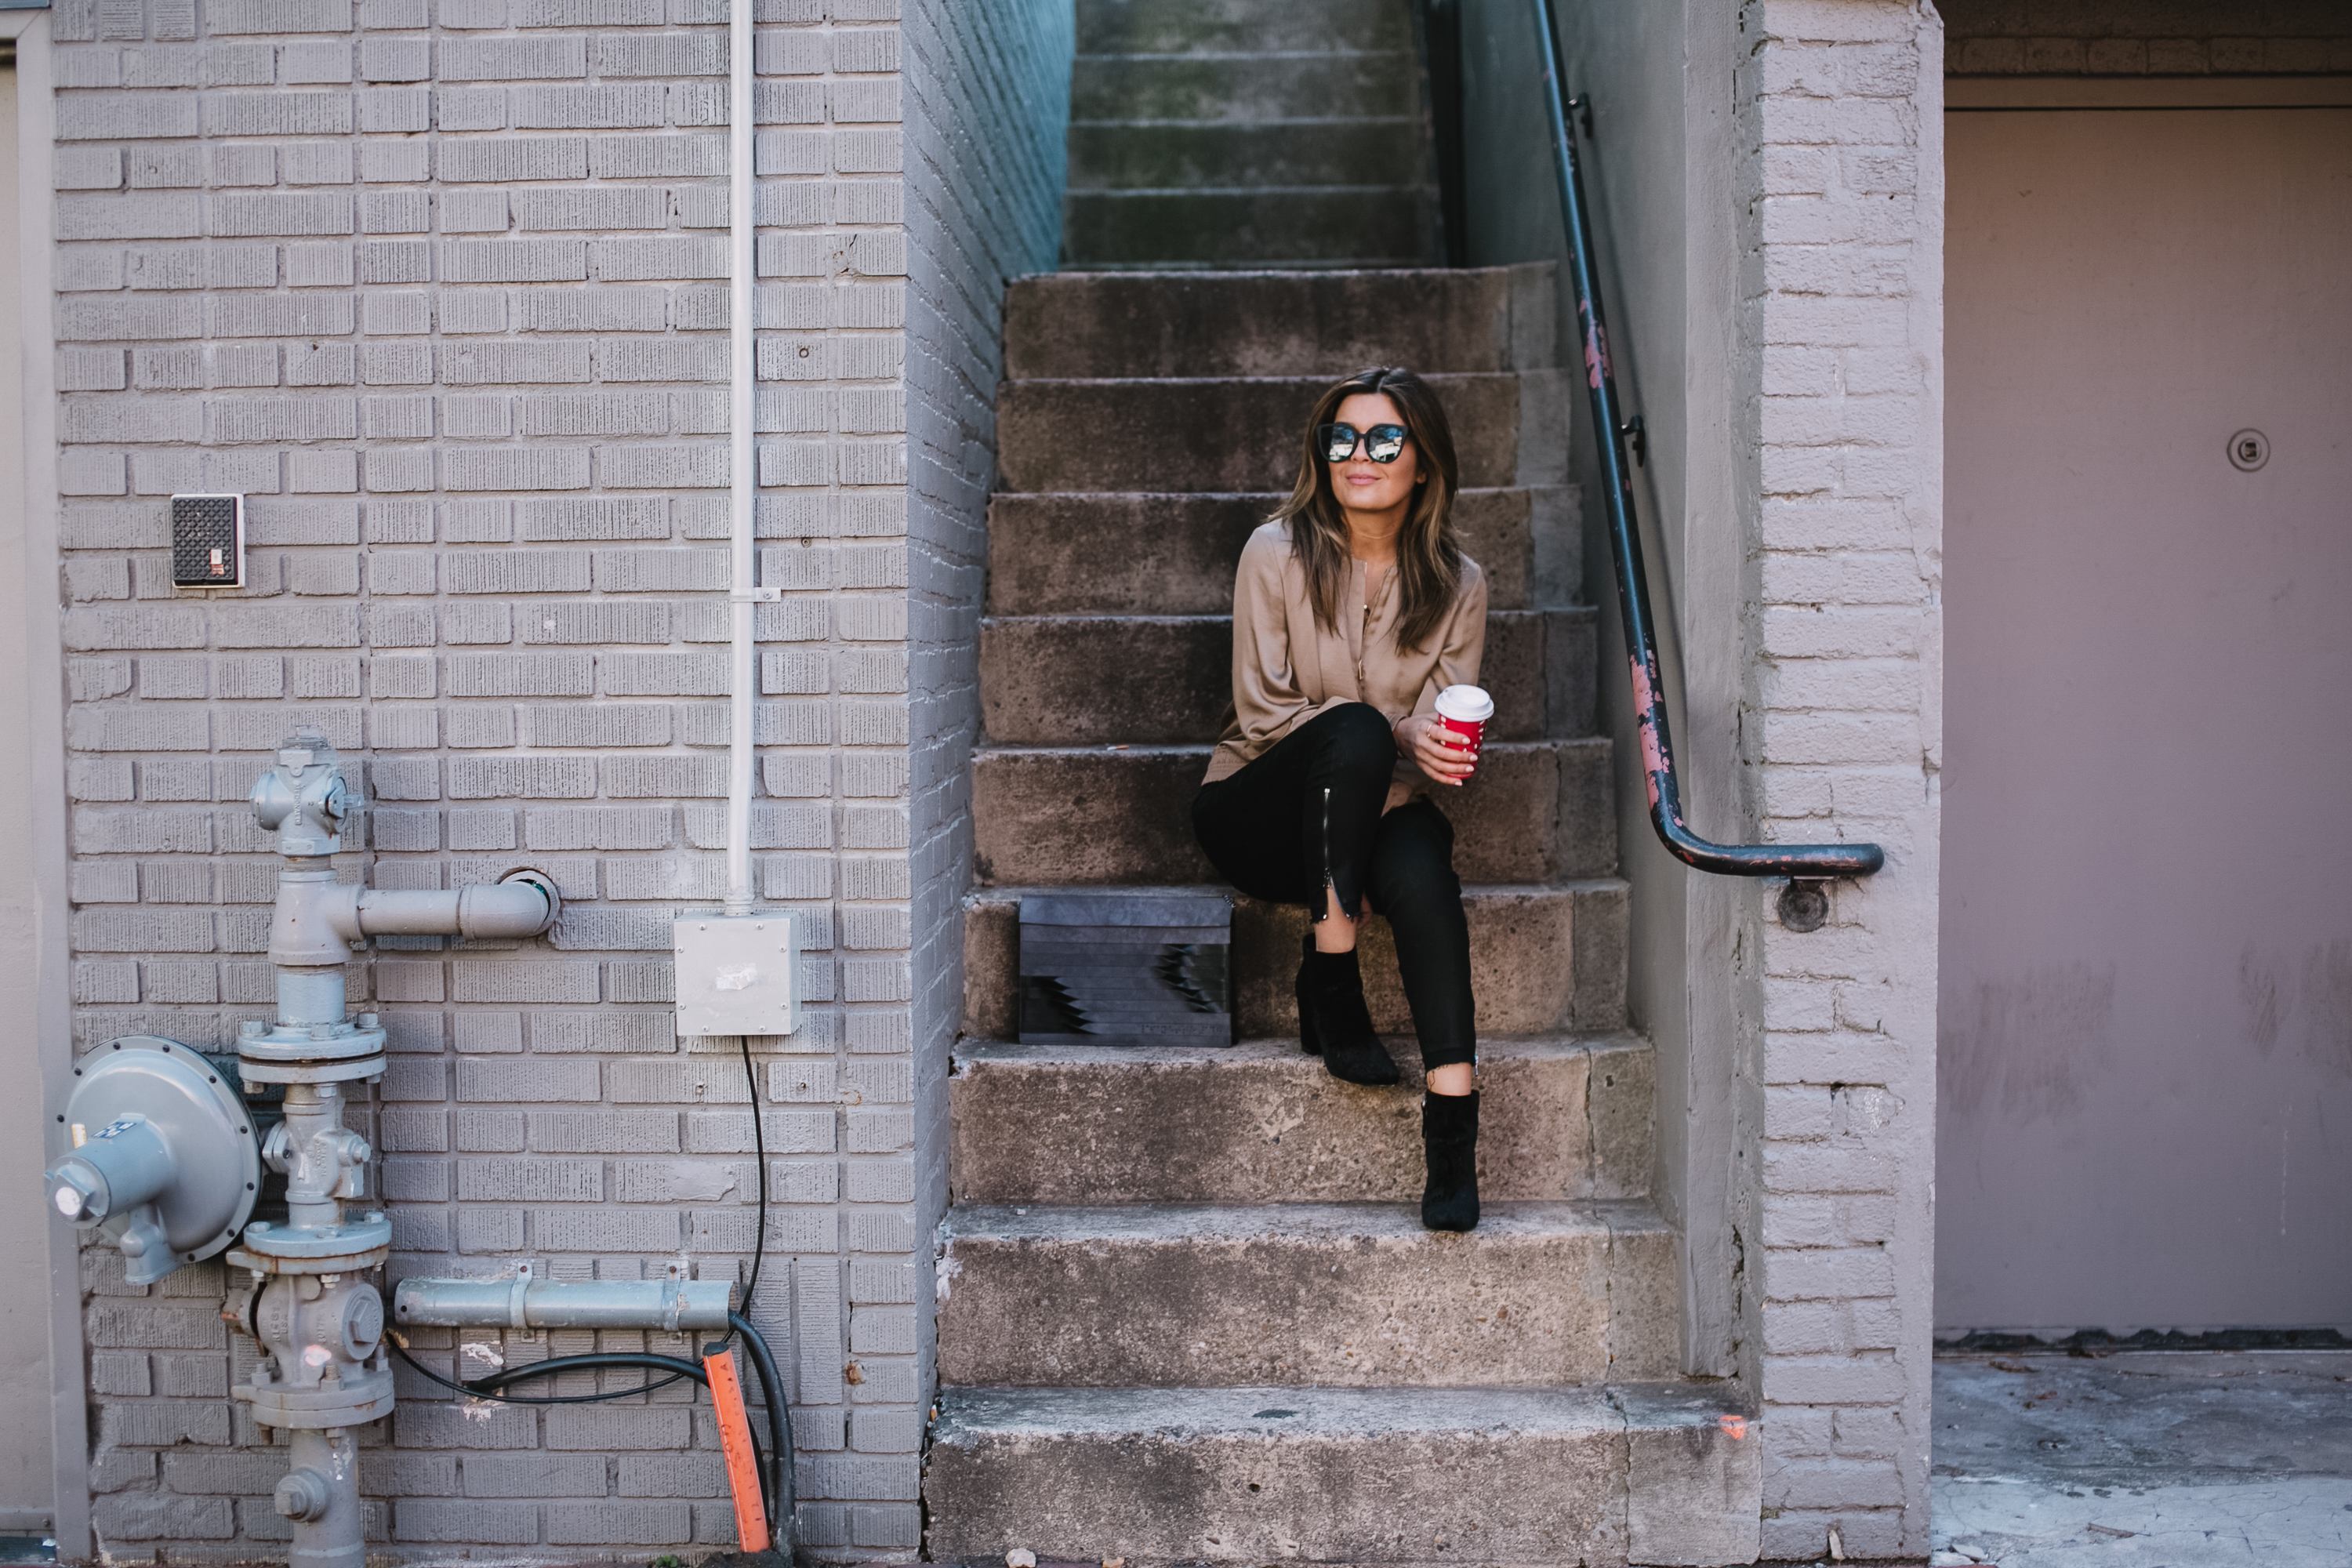 Blogger Sara Azani of Style MBA is photographed wearing Lafayette 148 New York Bryant satin bomber jacket, Quay Australia black oversize sunglasses, J Brand Coated Skinny Jeans, Target paisley booties, and limited edition ITA for Lafayette 148 New York Shantou Pouchette purse. Petite brunette woman wearing simple neutral outfit holding a small coffee while sitting in an outdoor stairwell.